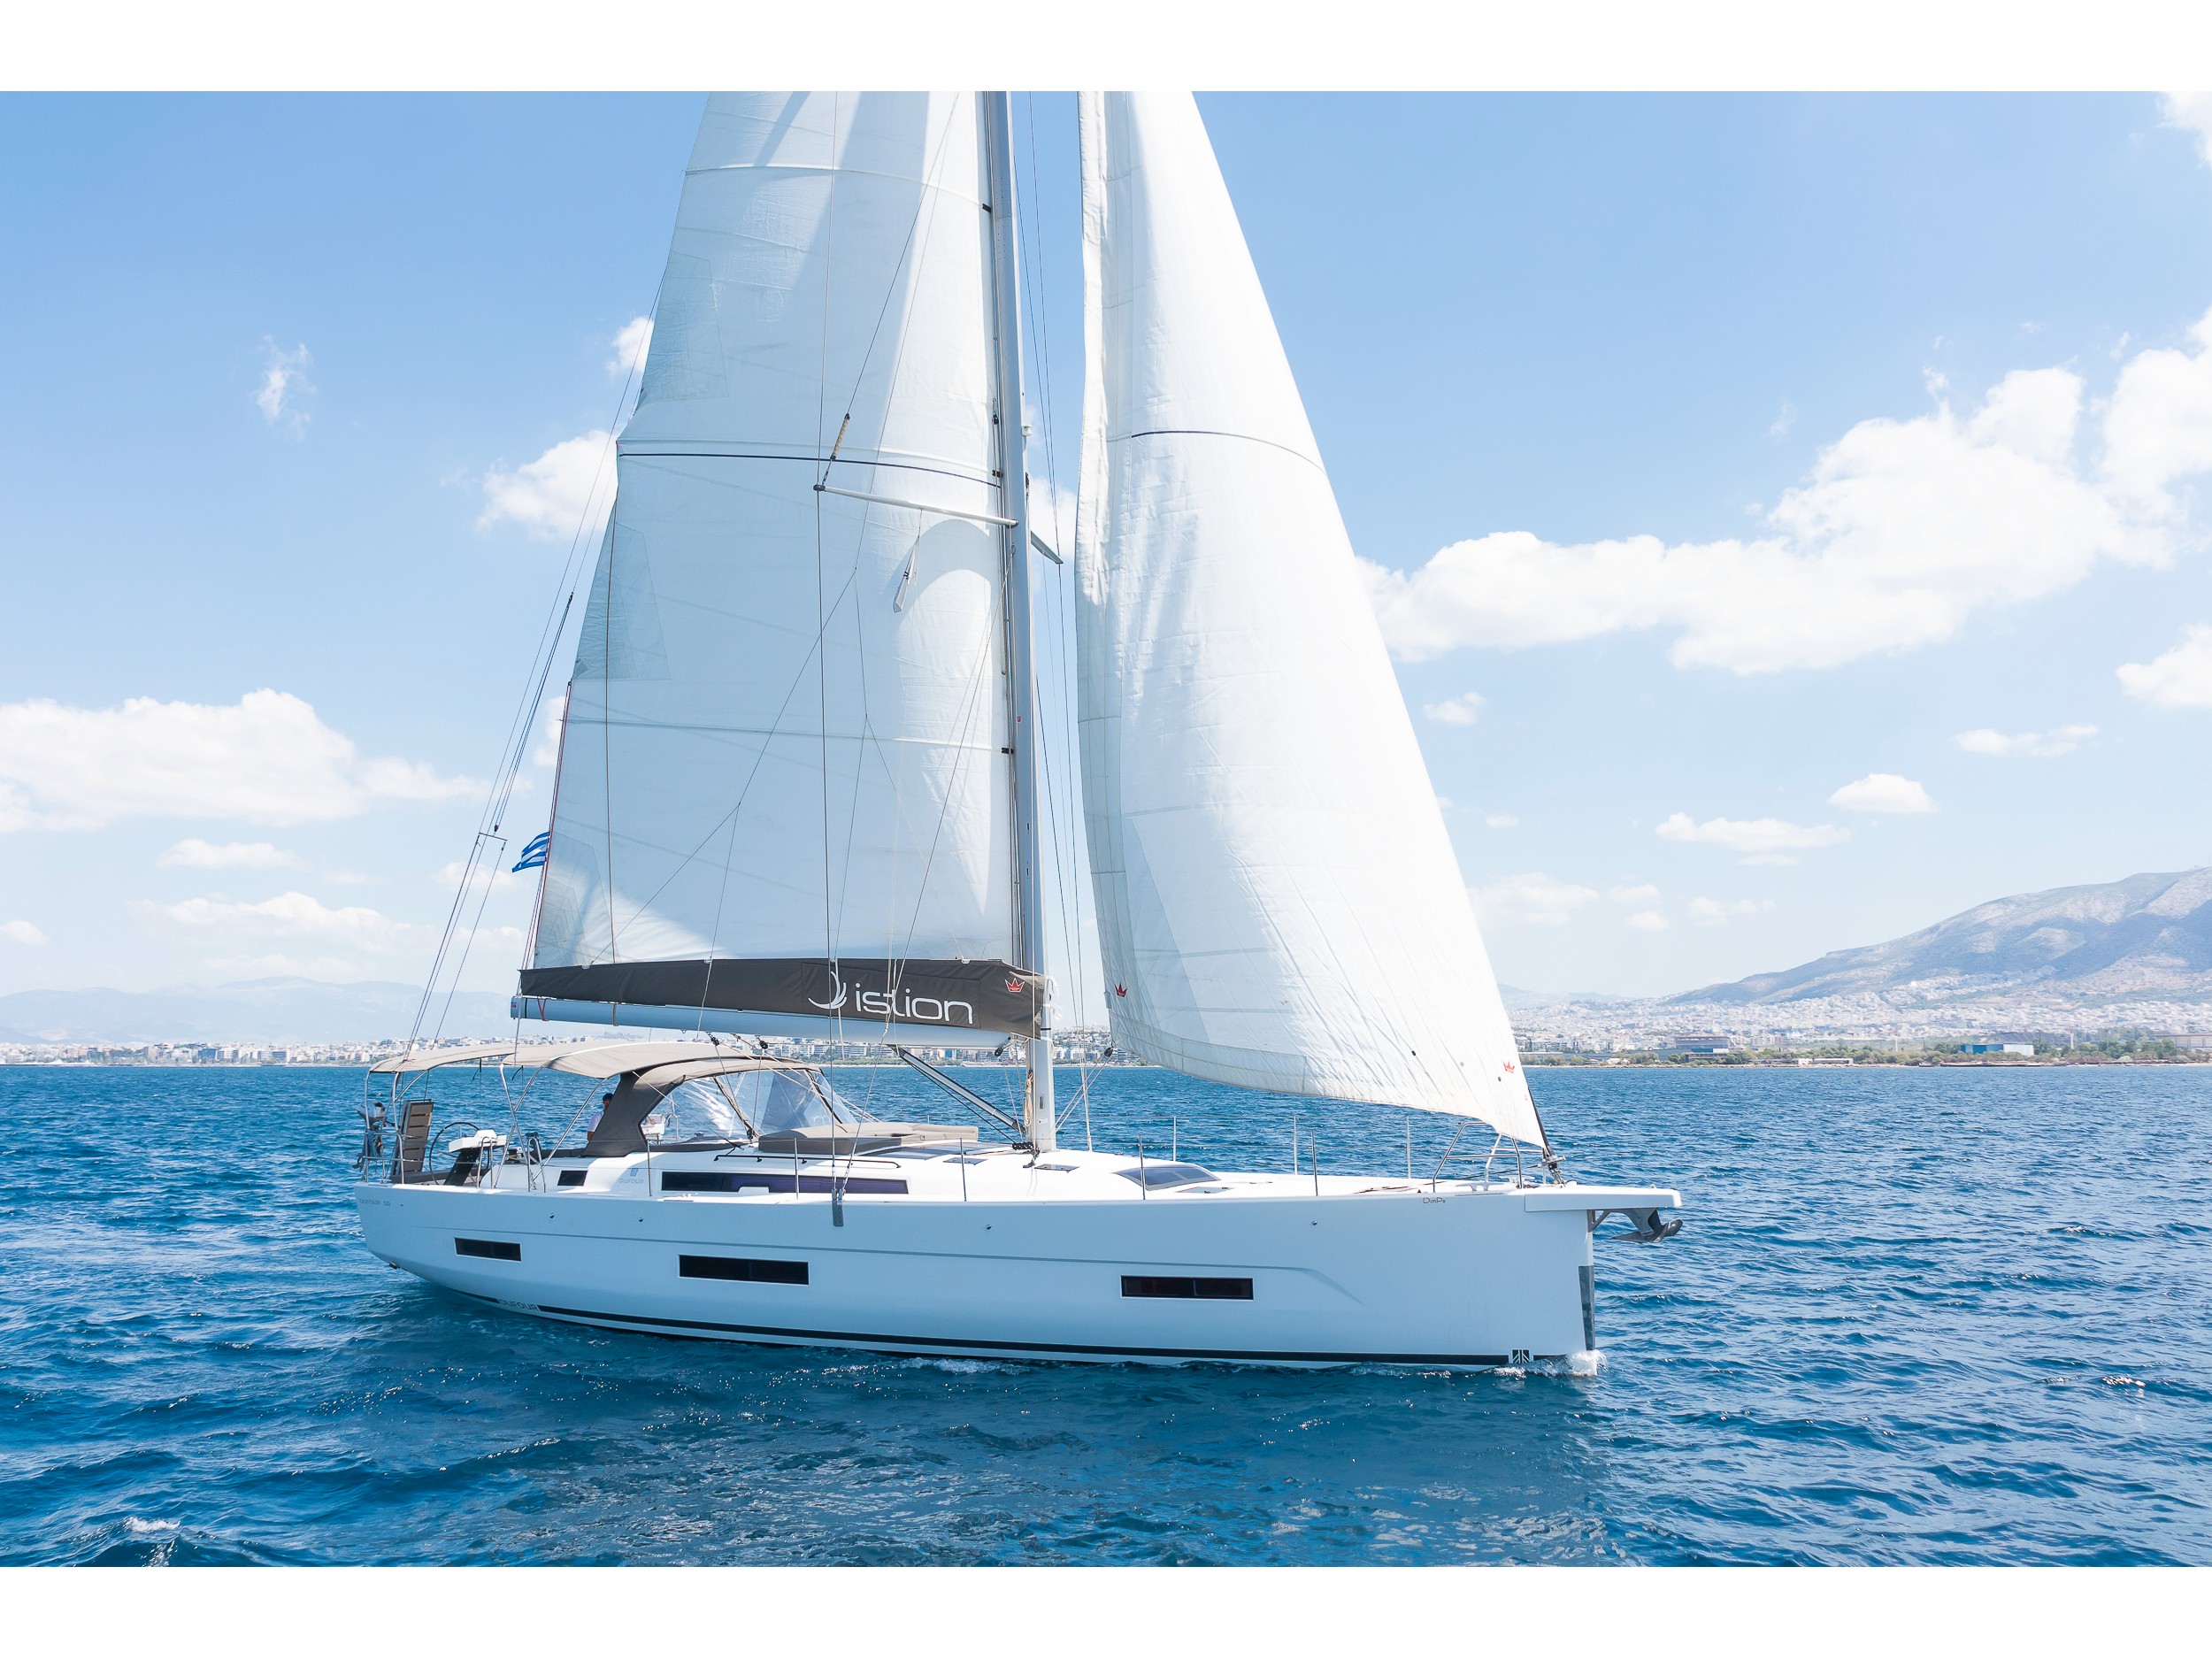 Yacht charter Dufour 530 - Greece, Dodecanese, Appears